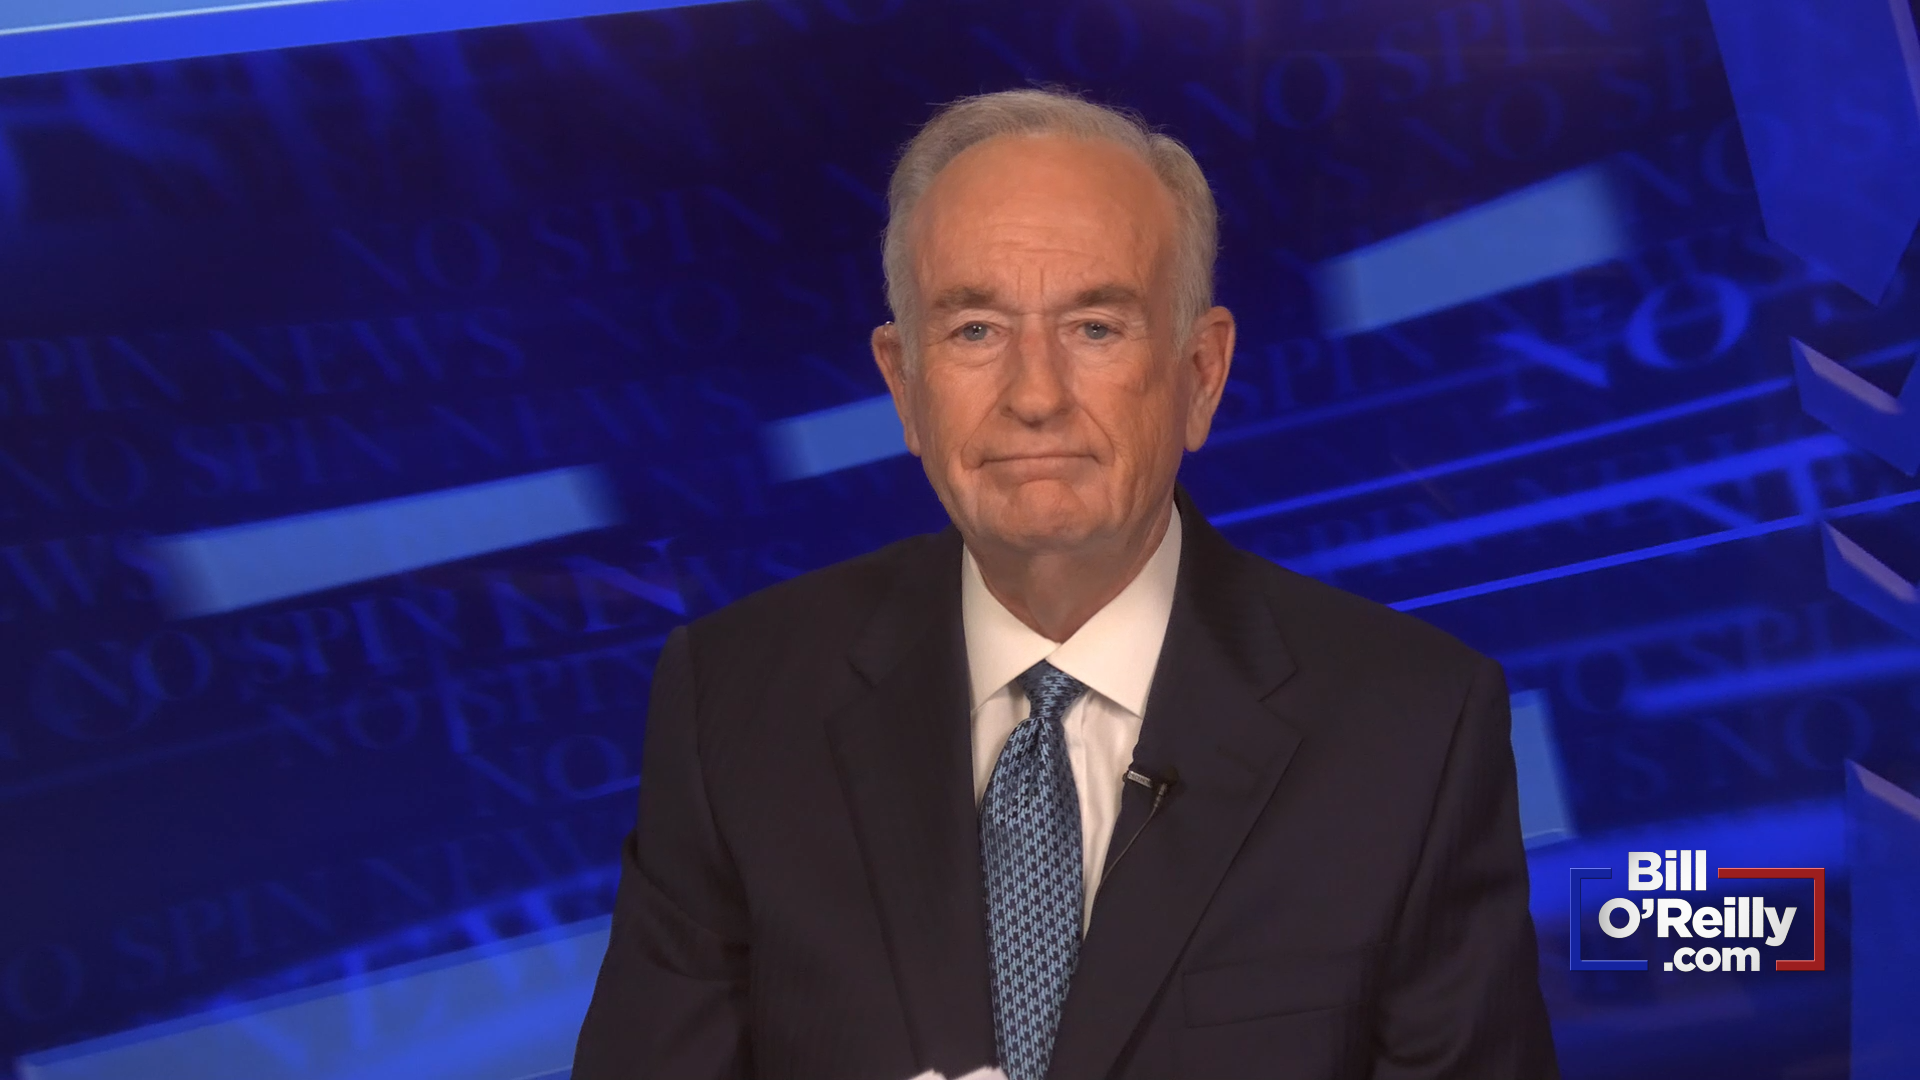 O'Reilly on the 'War' for American Children